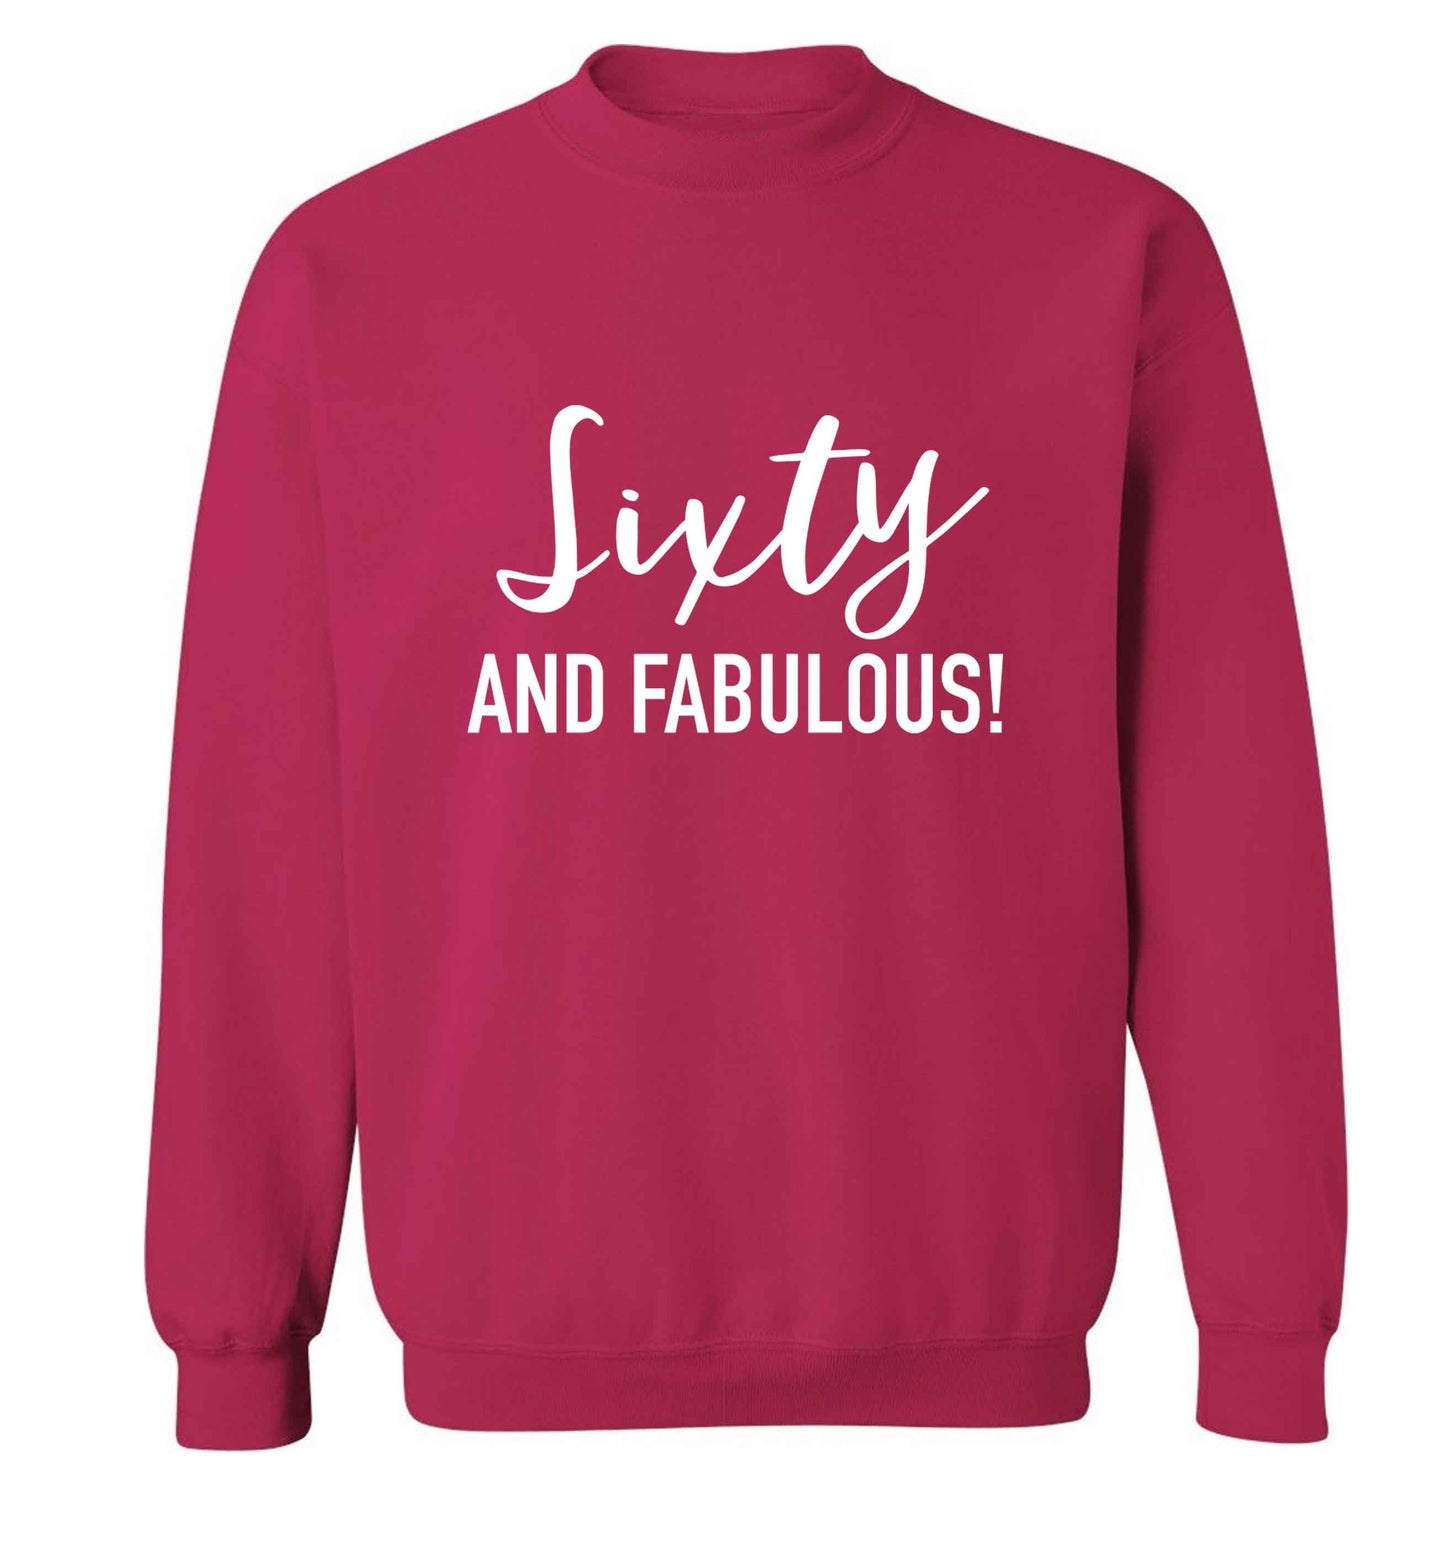 Sixty and fabulous adult's unisex pink sweater 2XL